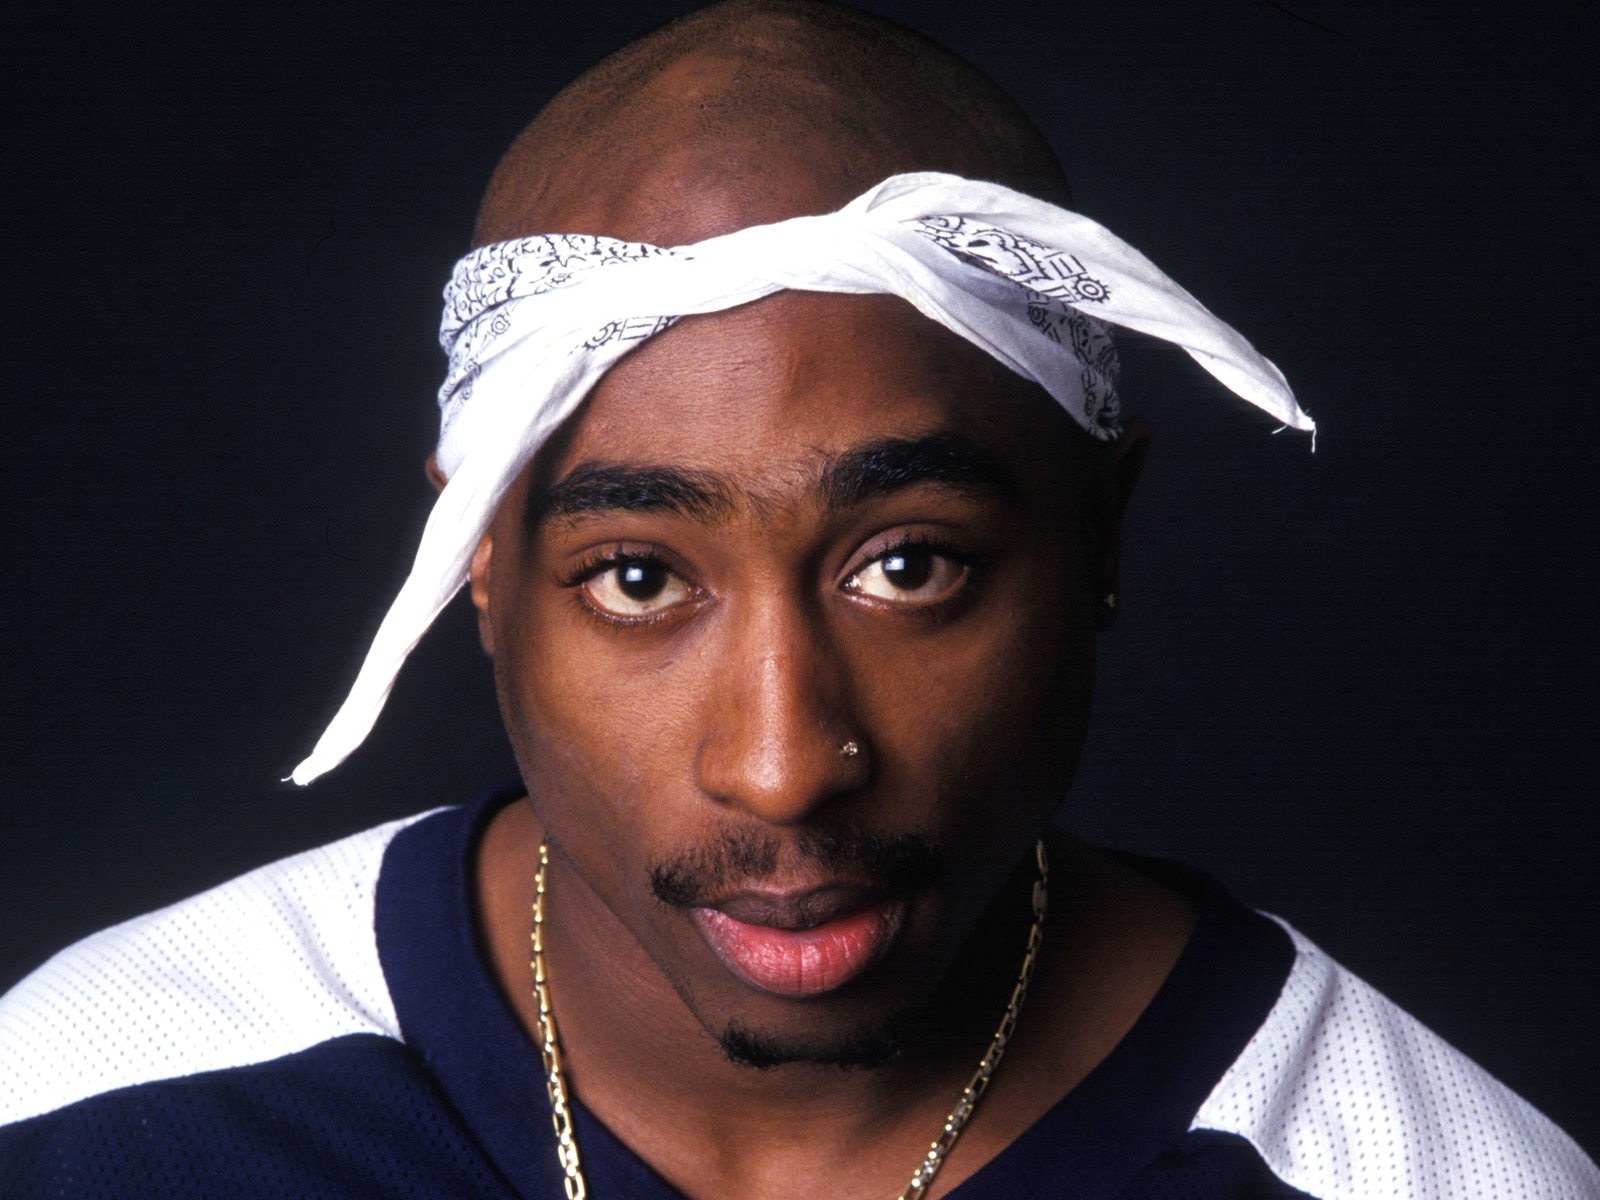 Retired police officer said that Tupac Shakur paid $1.5 million to fake his death